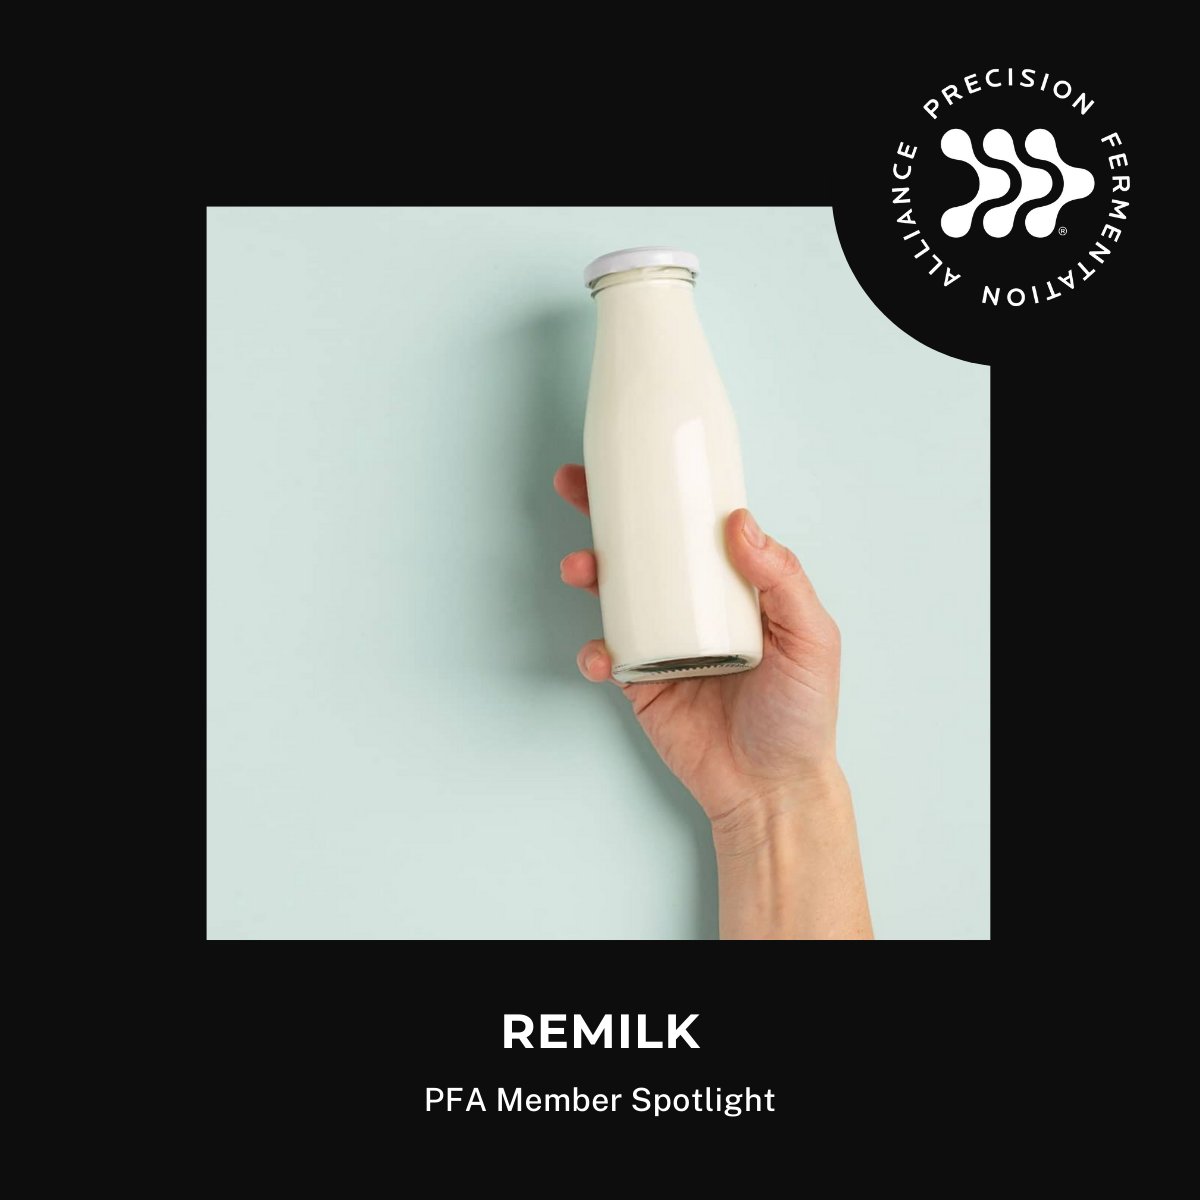 ✨Member Spotlight!✨

Remilk reimagines the future of food by crafting real dairy without a single cow, bringing a message of hope and joy to our planet, our body … and cows! #MemberSpotlight #PFA #FoodInnovation